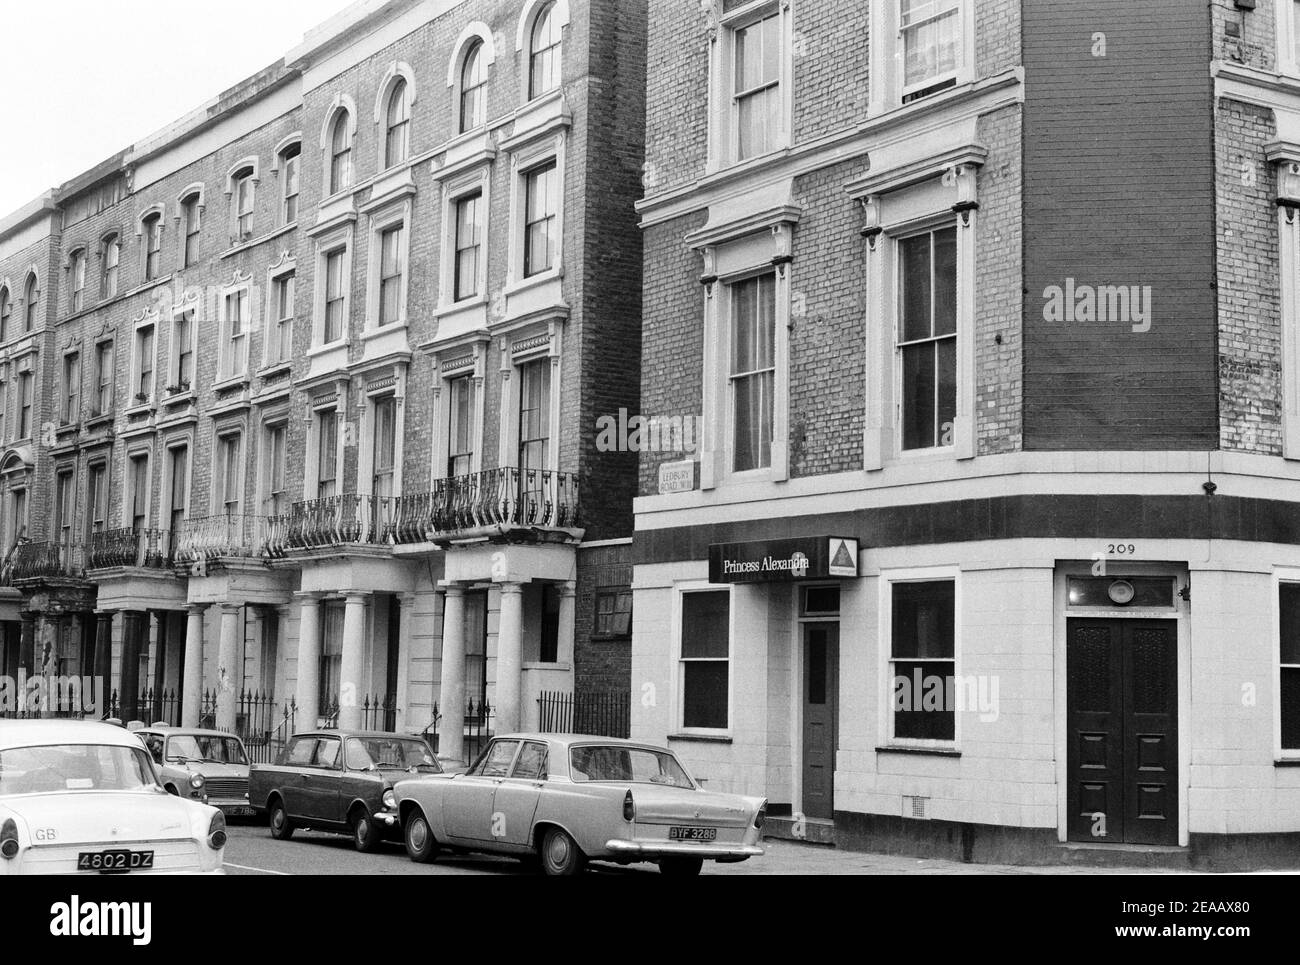 UK, West London, Notting Hill, 1973. Rundown & dilapidated large four-story houses are starting to be restored and redecorated. Princess Alexandra pub on Ledbury Road (No.209) and corner of Westbourne Park Road. This is now a restaurant. Stock Photo